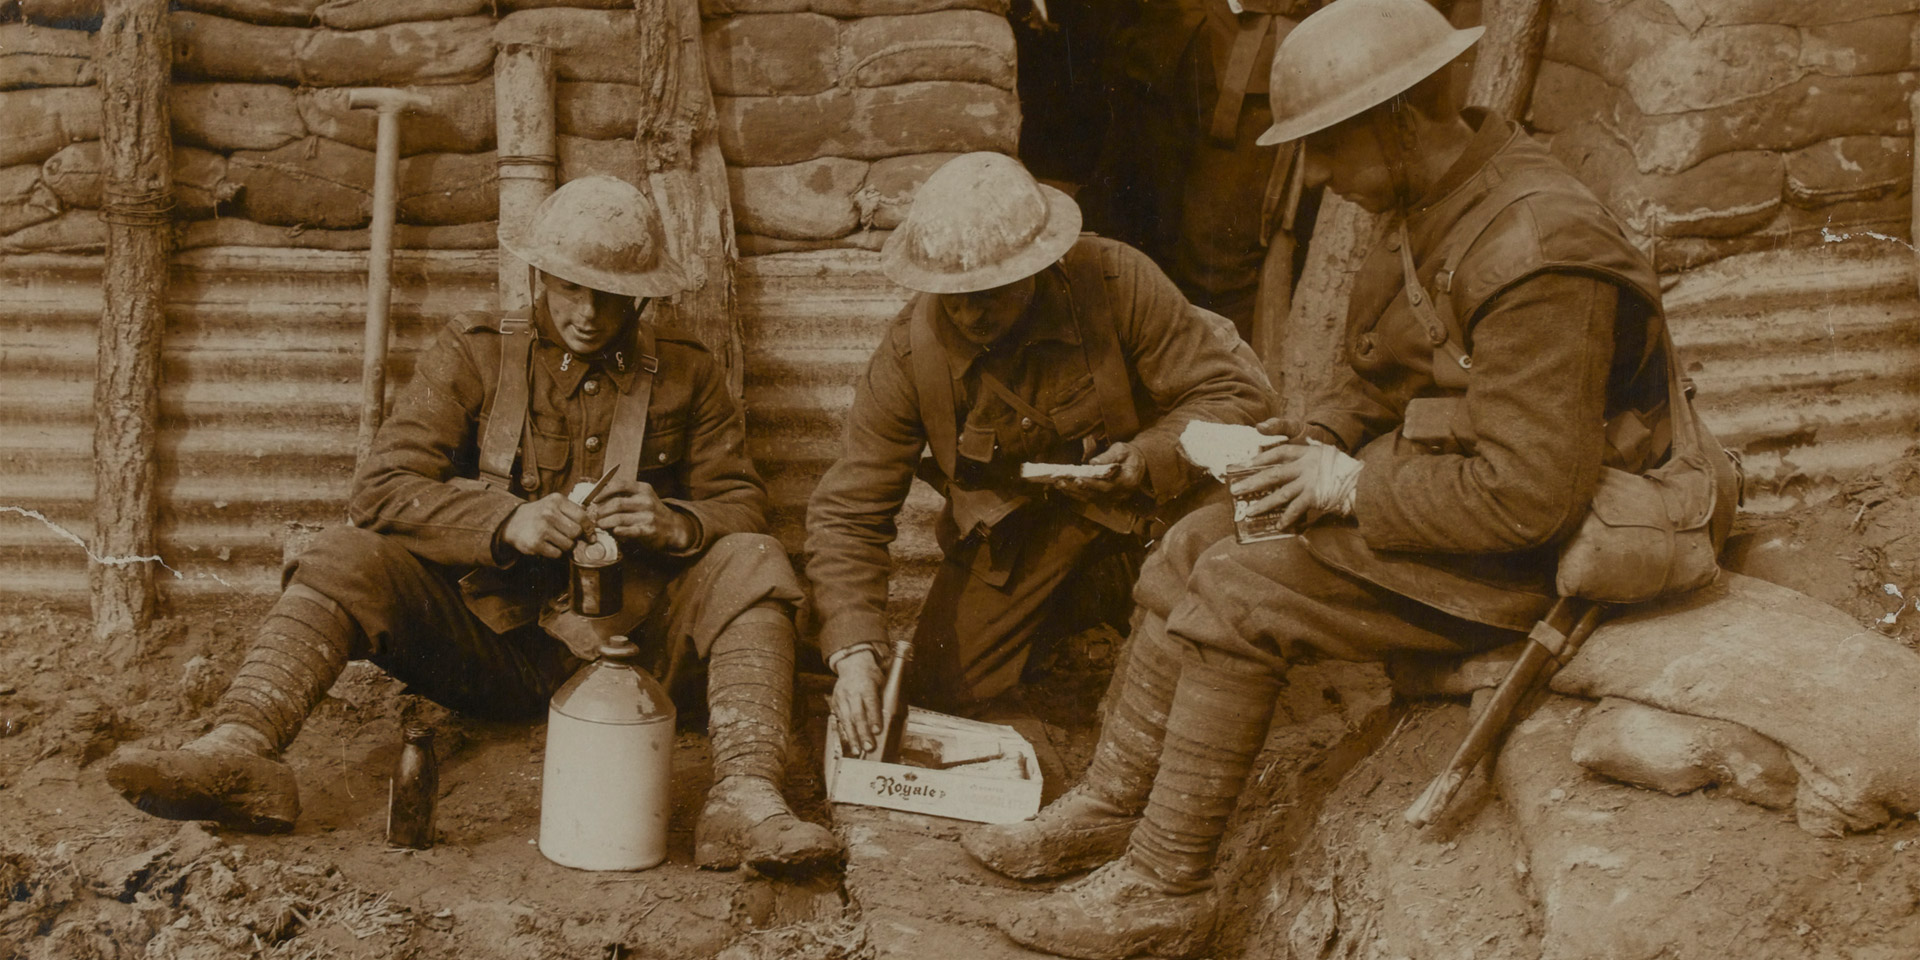 British soldiers eating in a trench, c1917